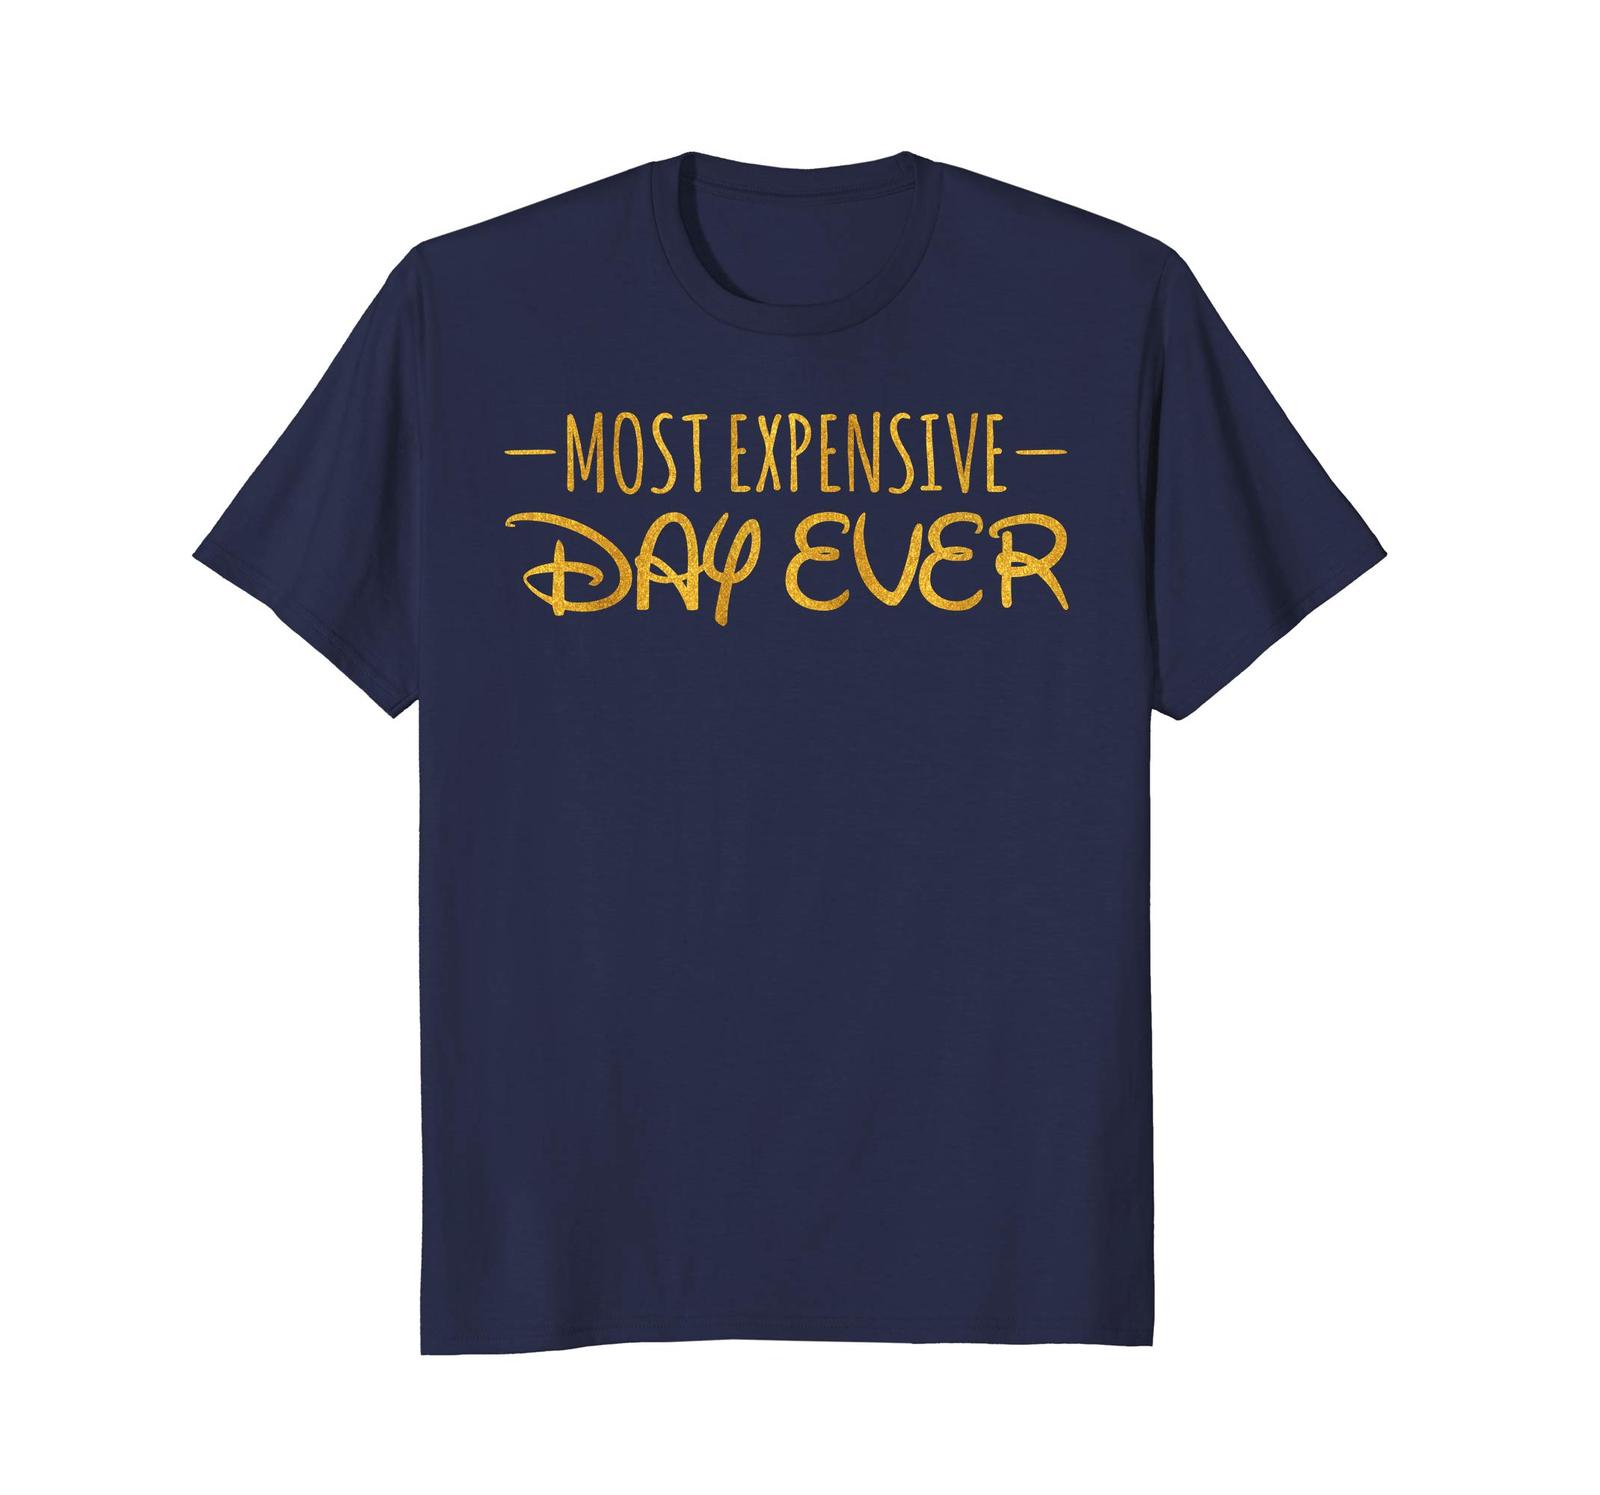 Funny Shirts - Most Expensive Day Ever T-Shirt Funny Men - T-Shirts, Tank Tops